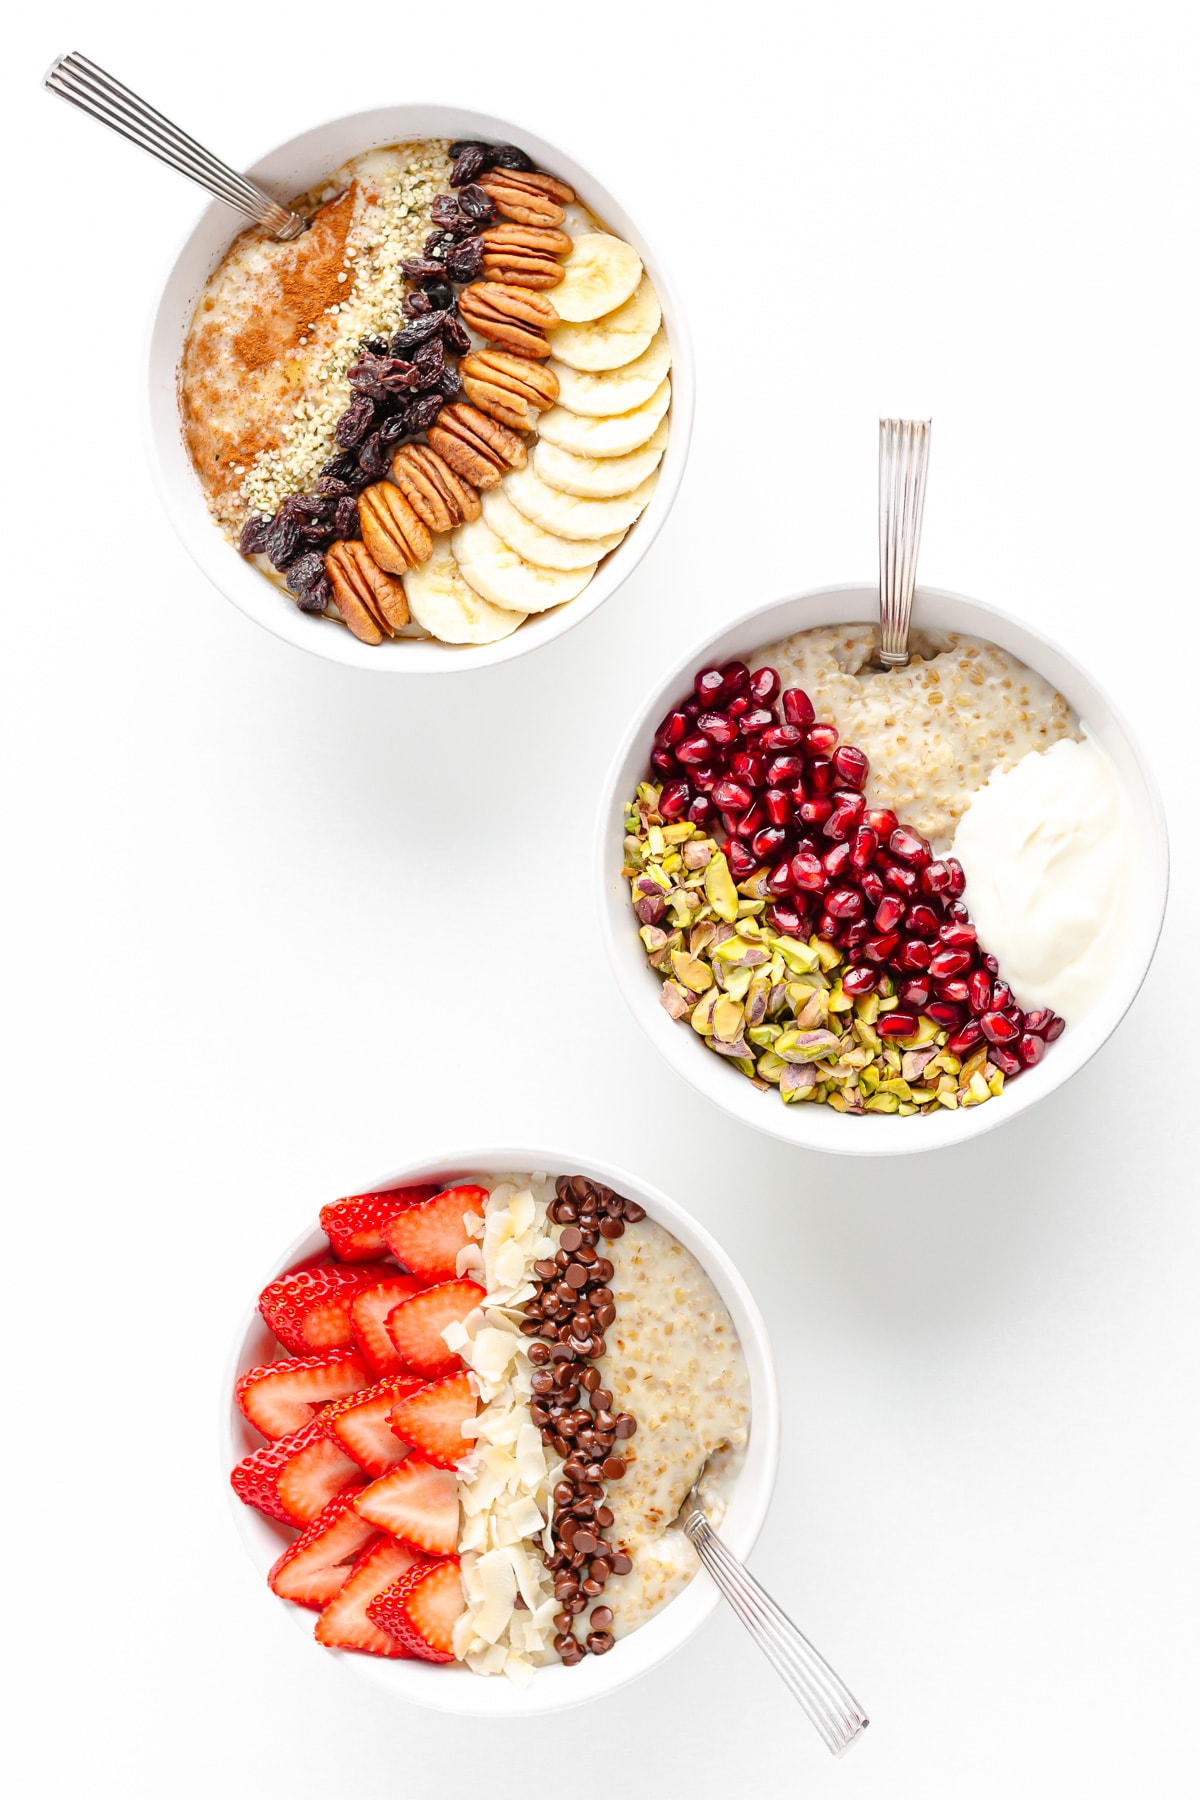 Three bowls of steel cut oatmeal with different toppings.